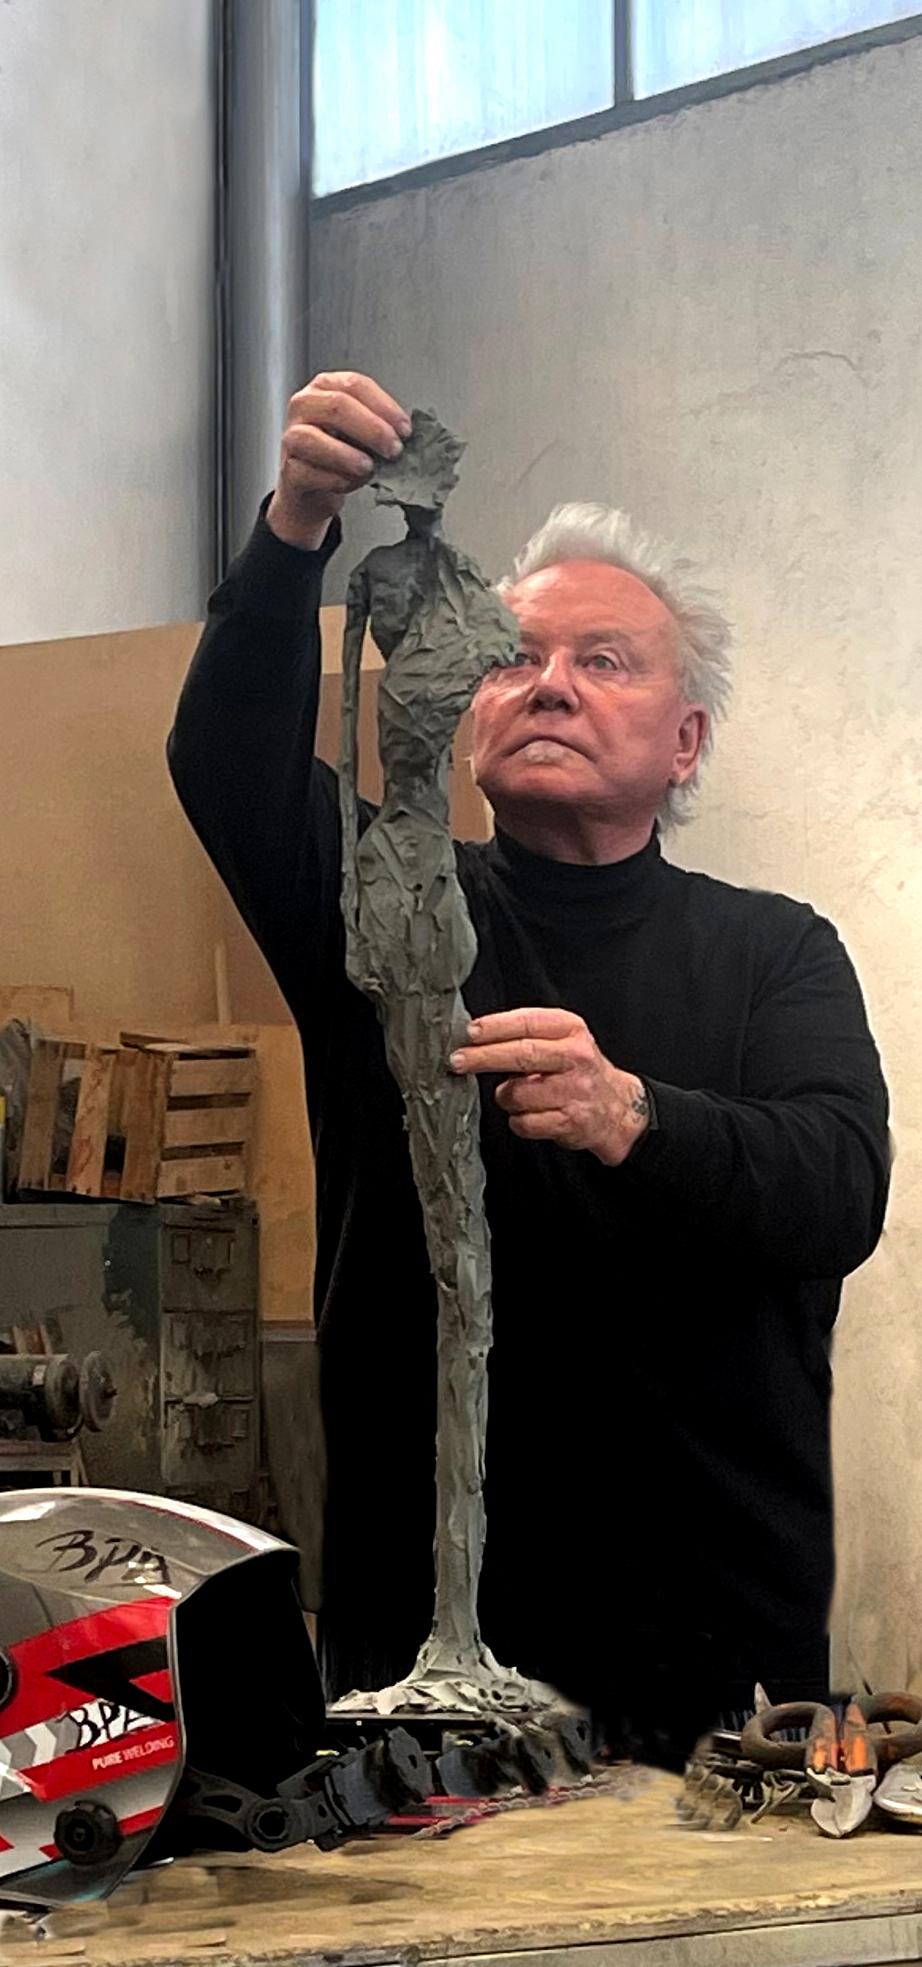 Frank Arnold is thought by many to be one of the foremost abstract figurative painters and sculptors of our time. He is a living master whose work is considered to be both personal and universal. He divides his time between working studios in